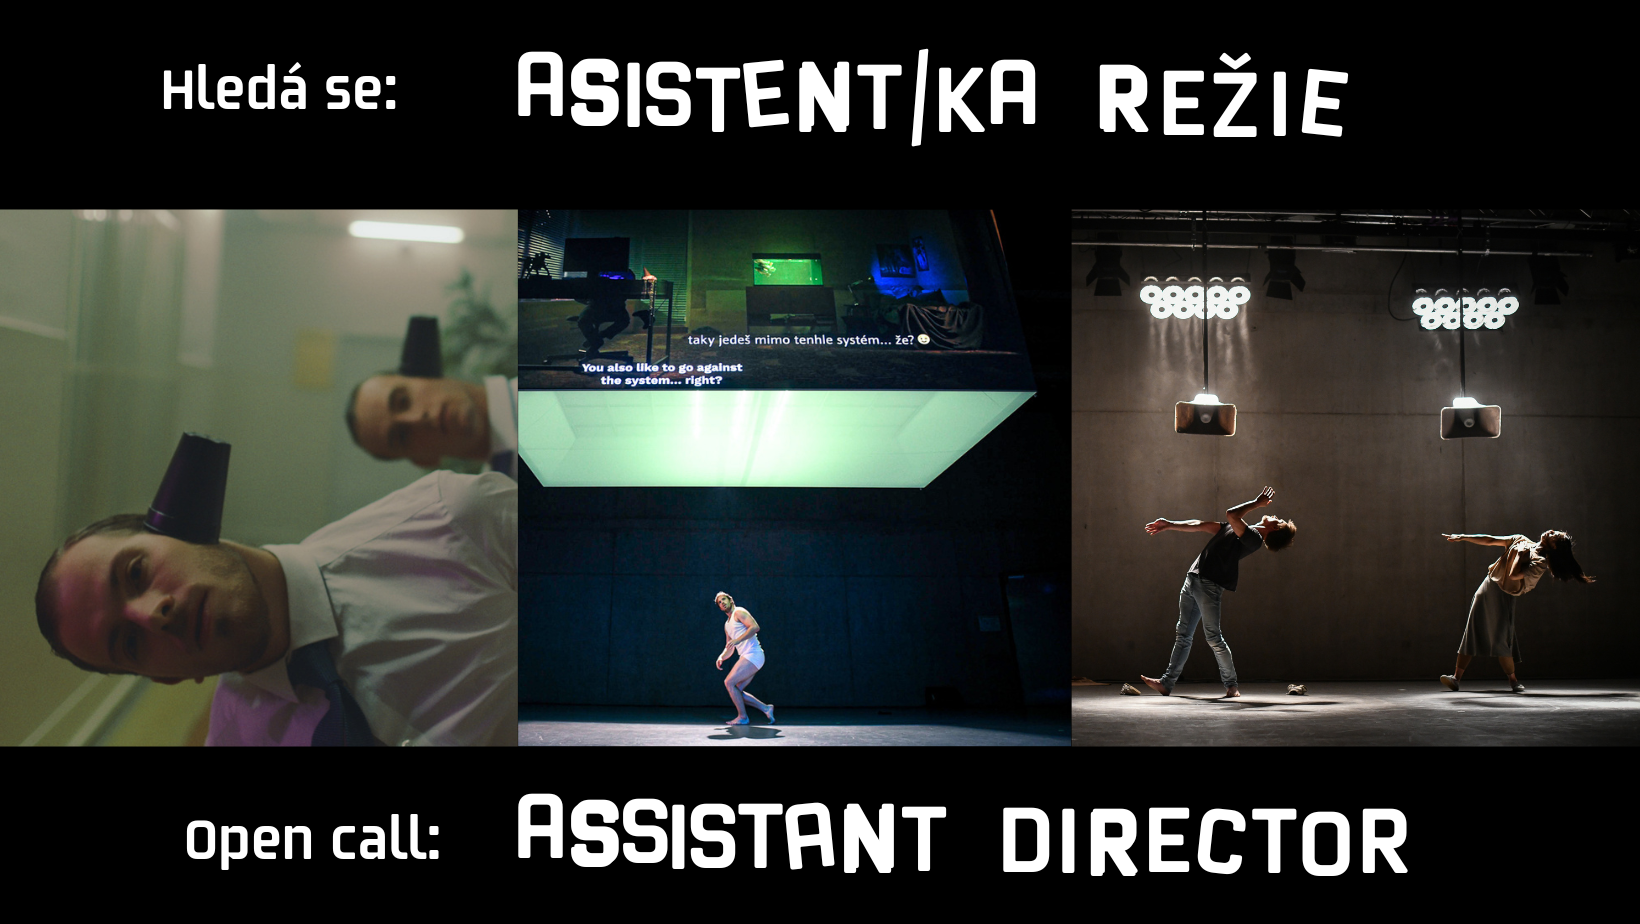 Open call: Assistant director